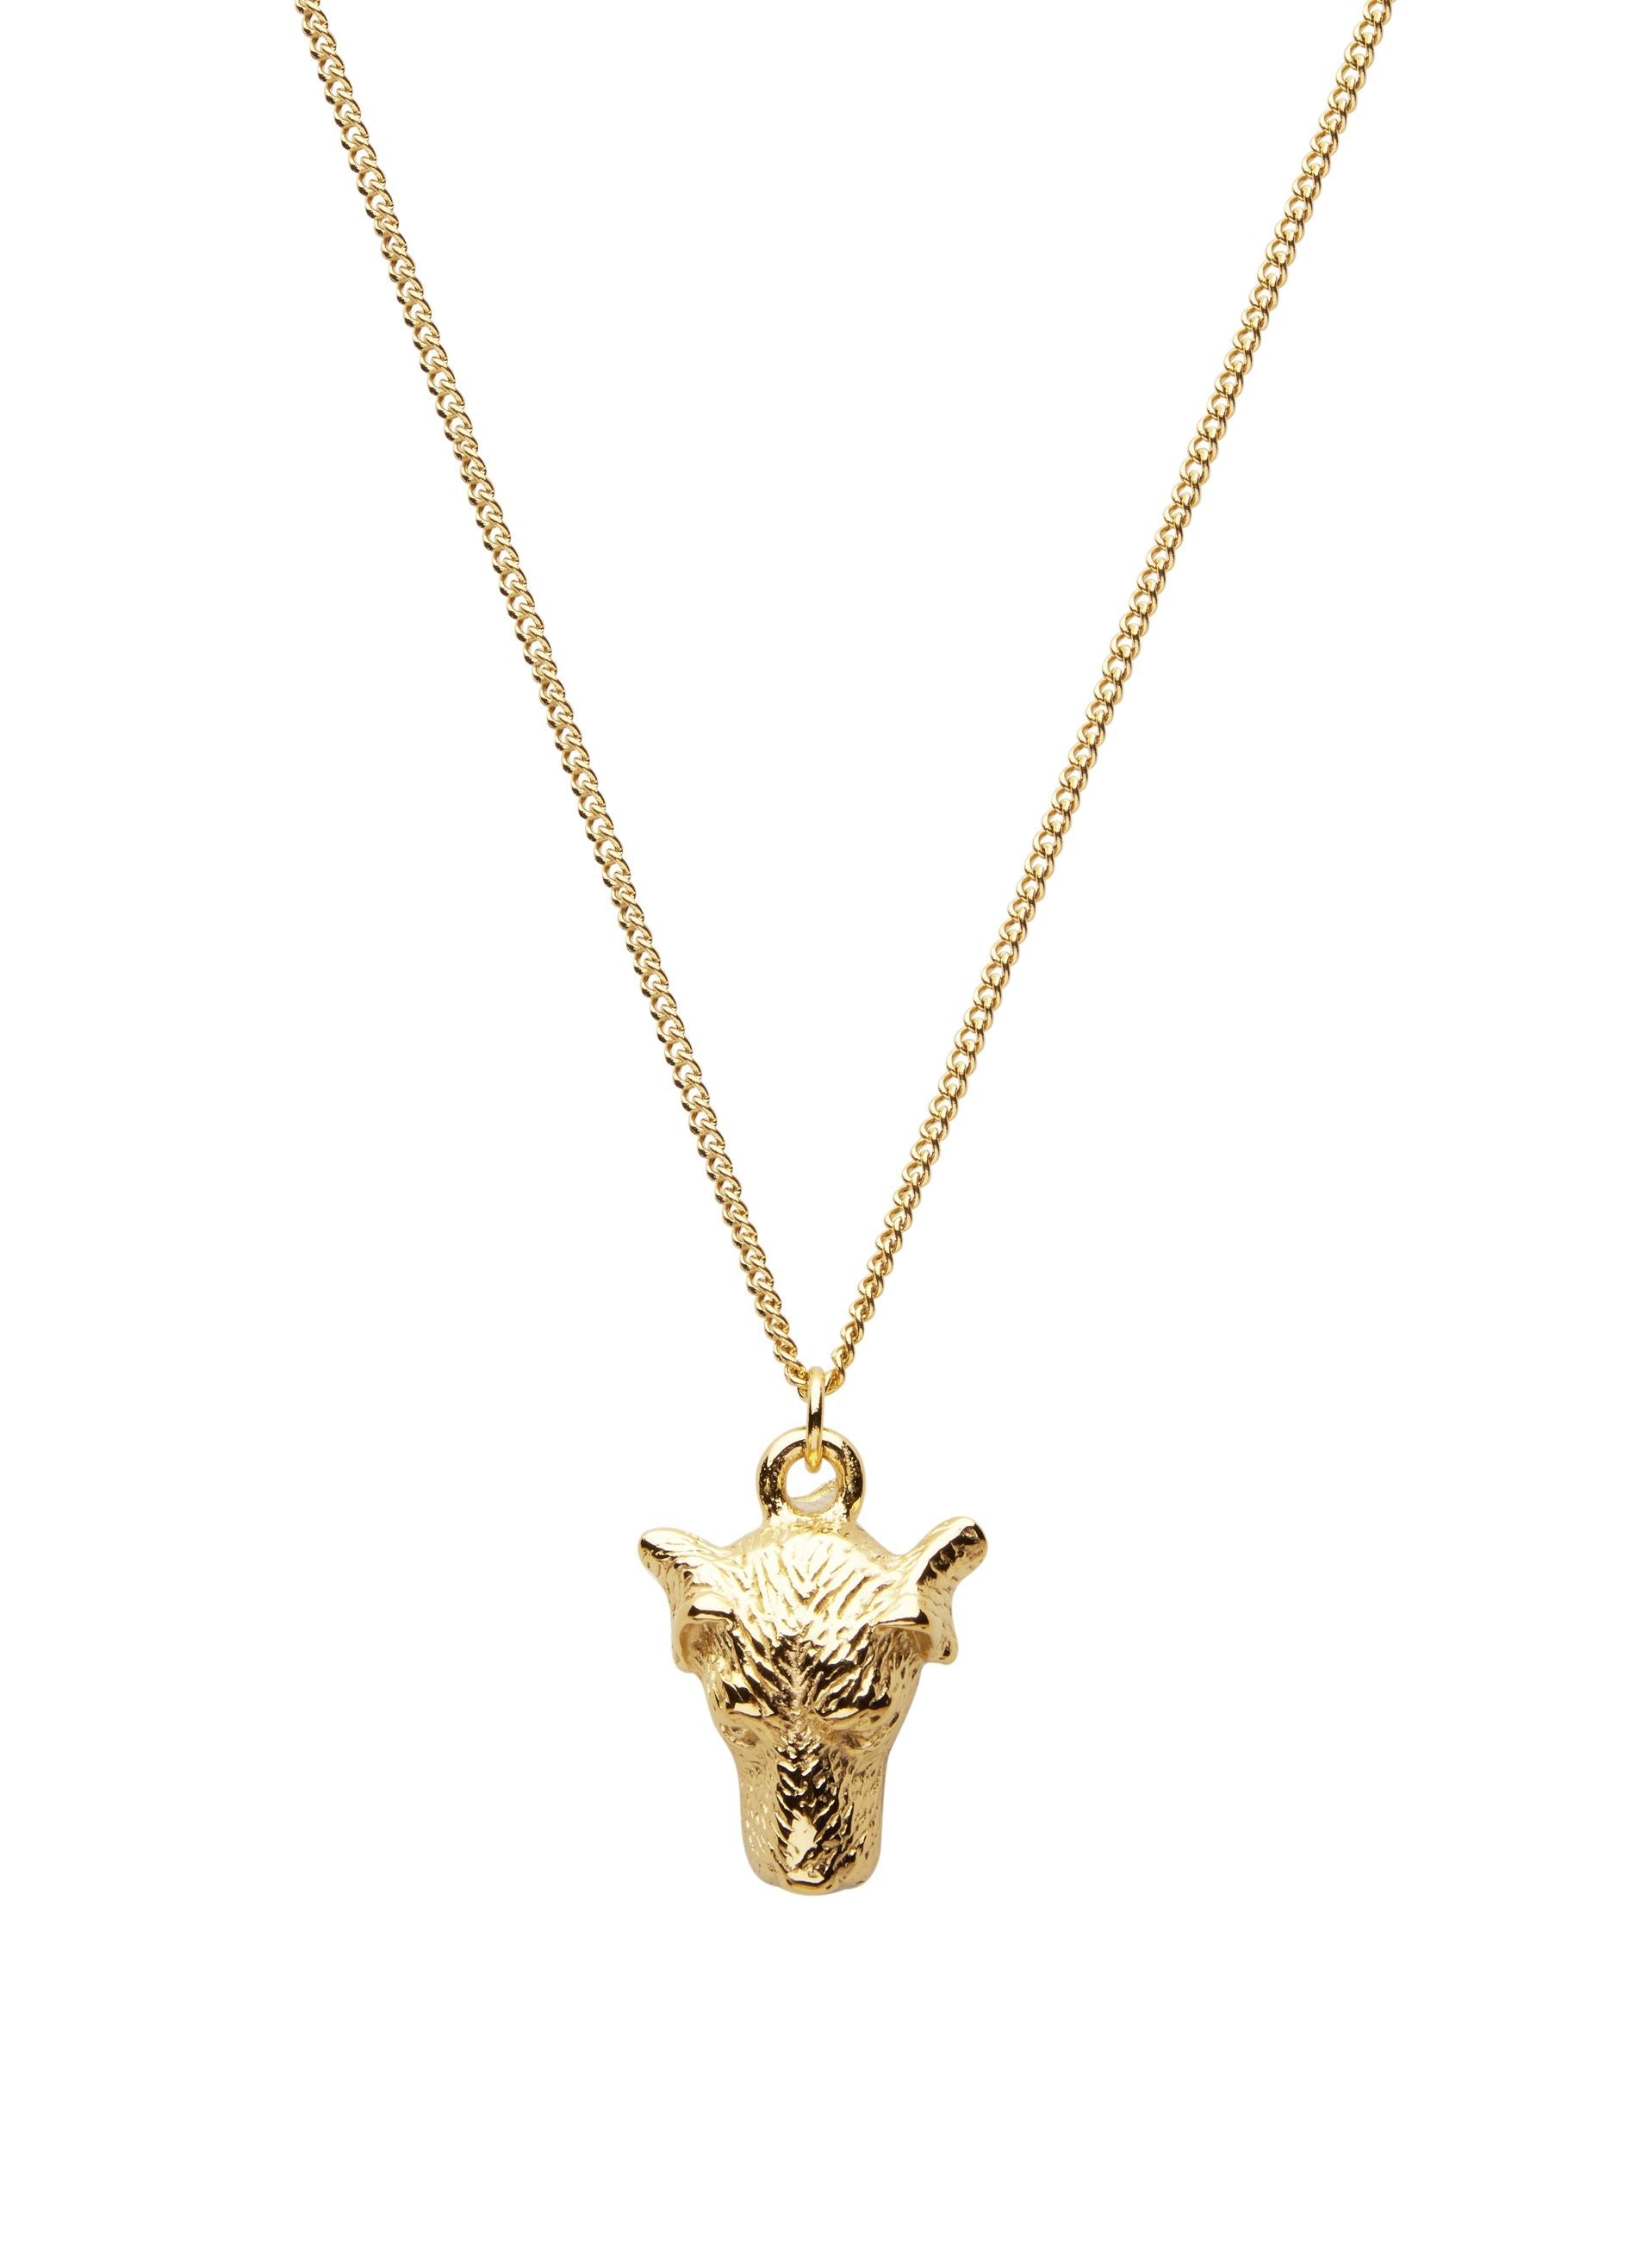 Skultuna Terrier Necklace, Gold Plated